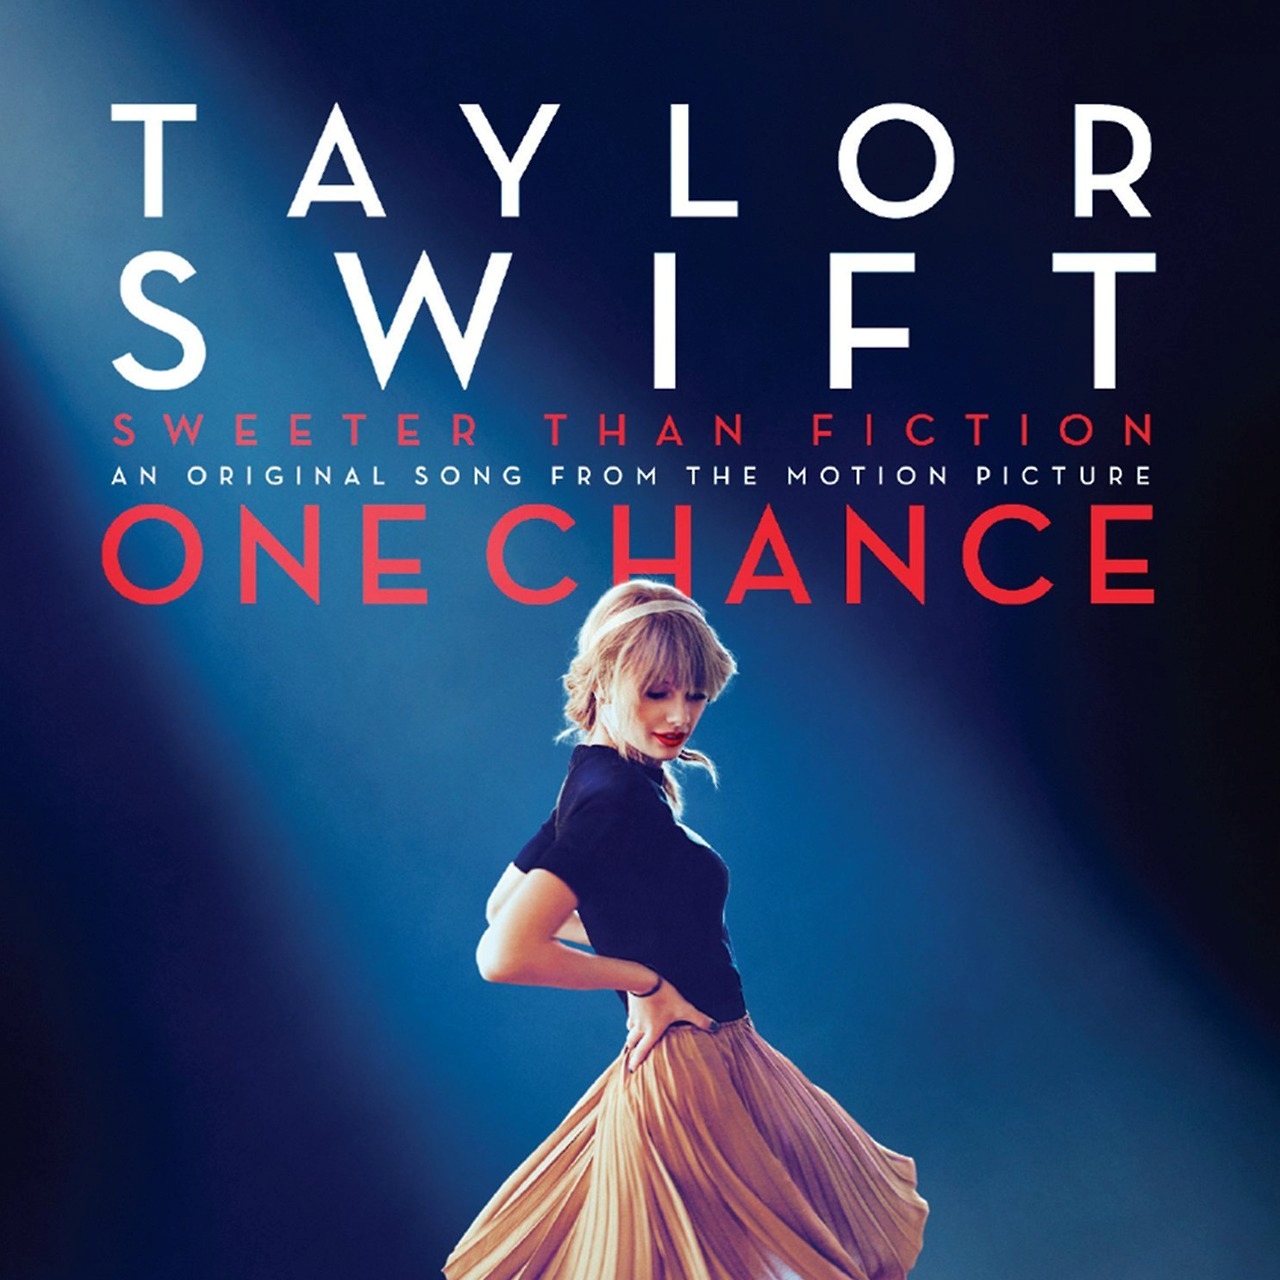 Taylor-Swift:-Sweeter-Than-Fiction-Single-Cover--01.jpg